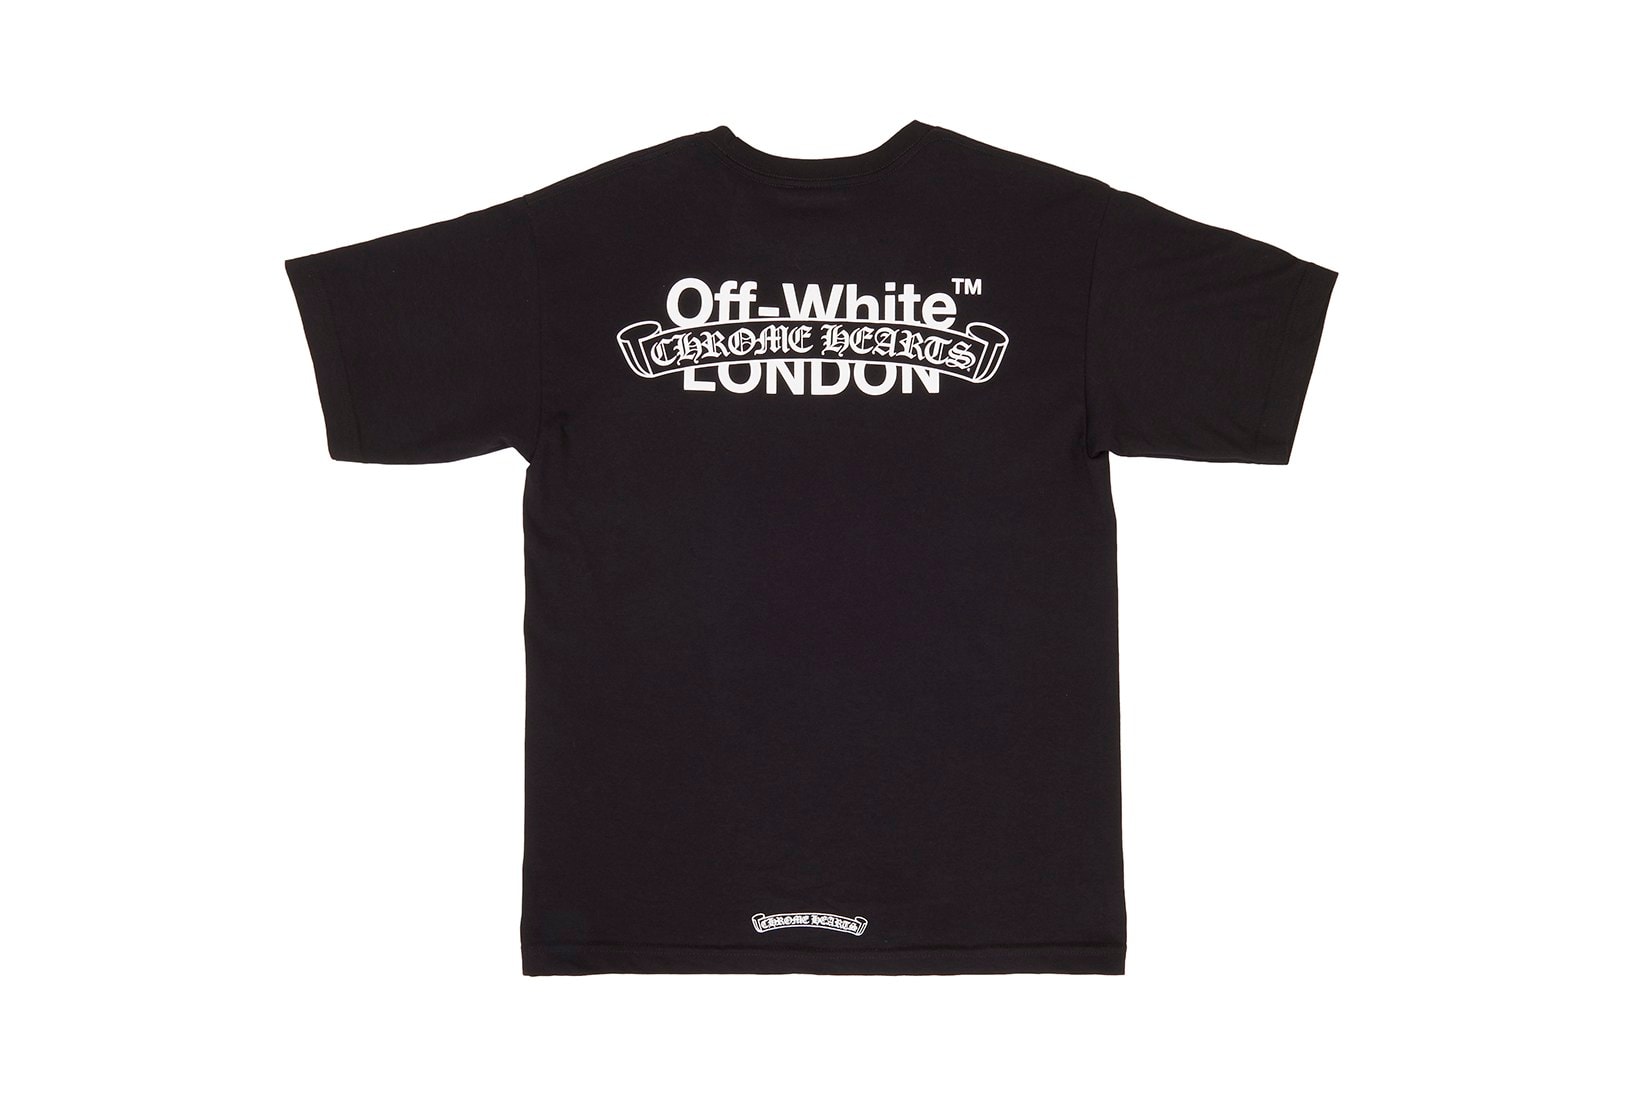 OFF-WHITE x Chrome Hearts Limited Edition T-Shirts